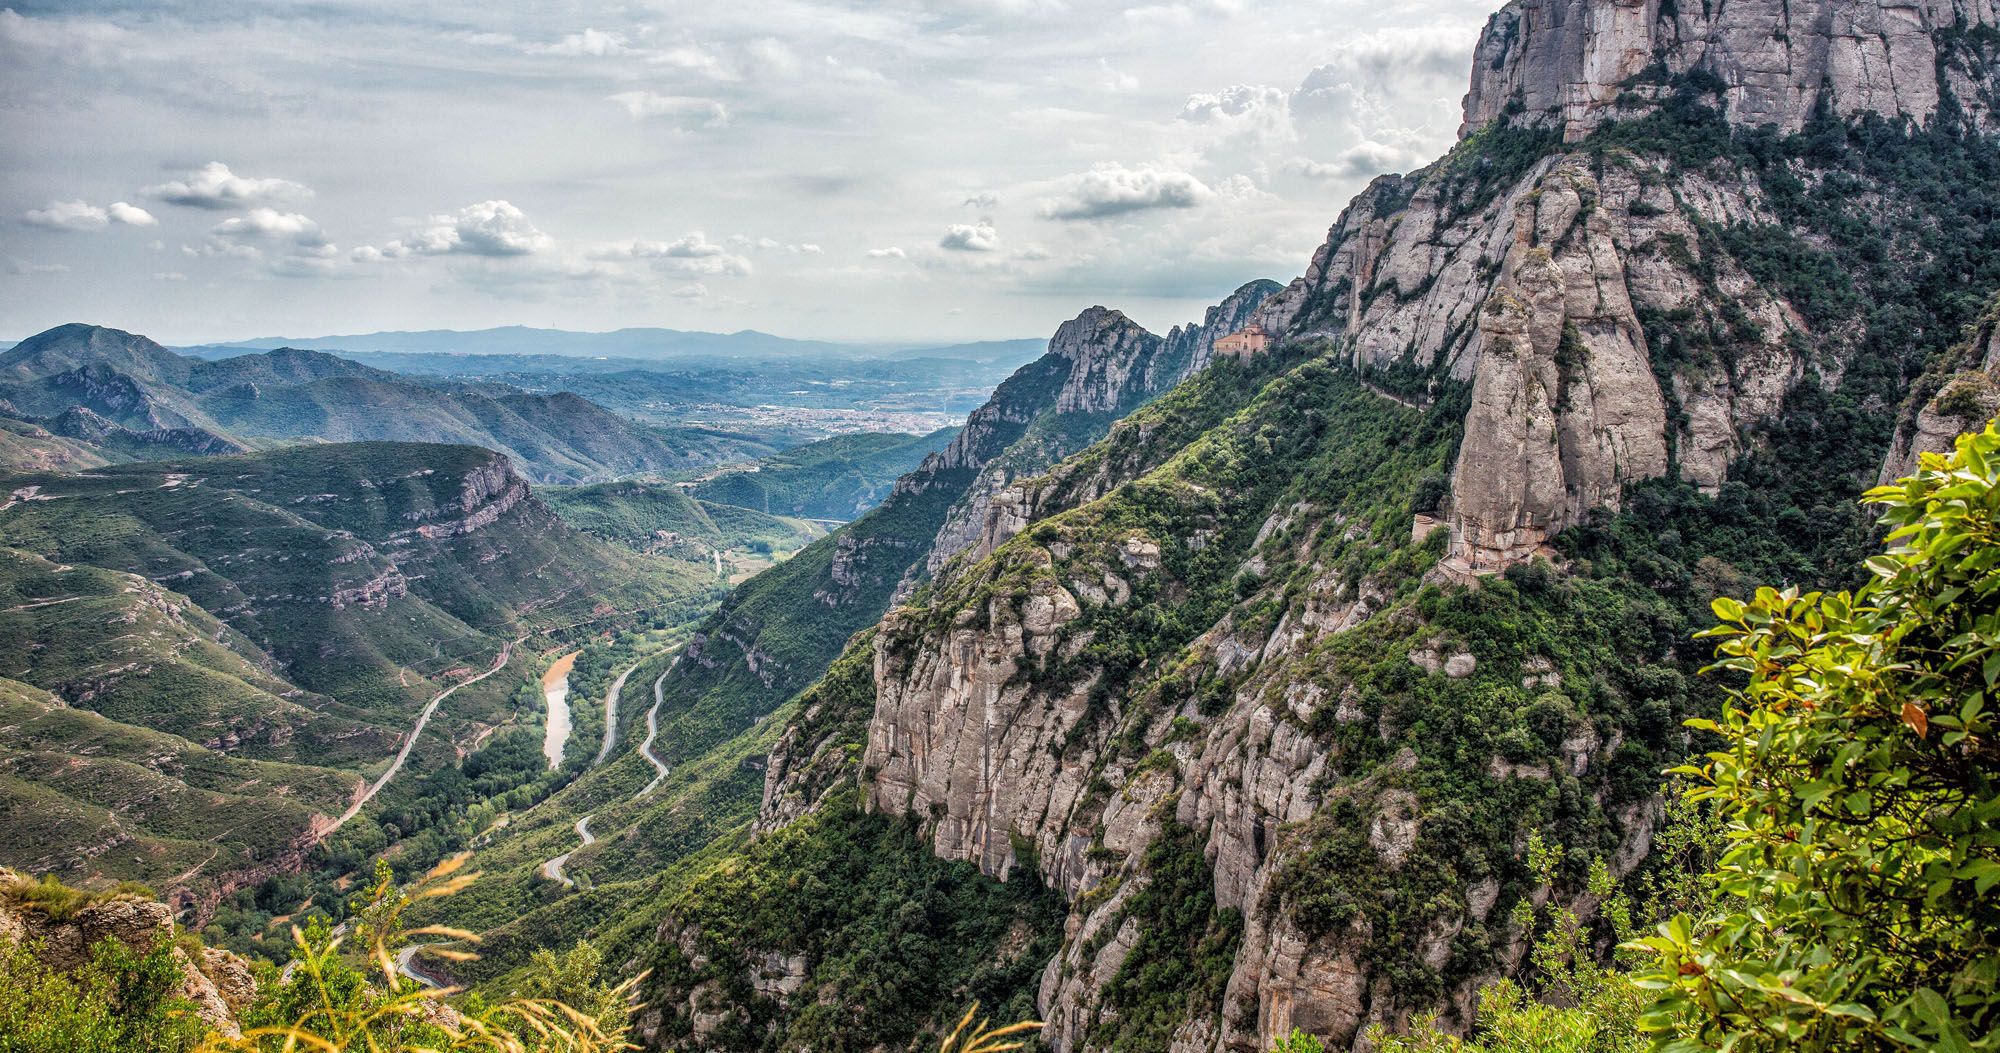 Featured image for “Hiking Montserrat in Catalonia, Spain”